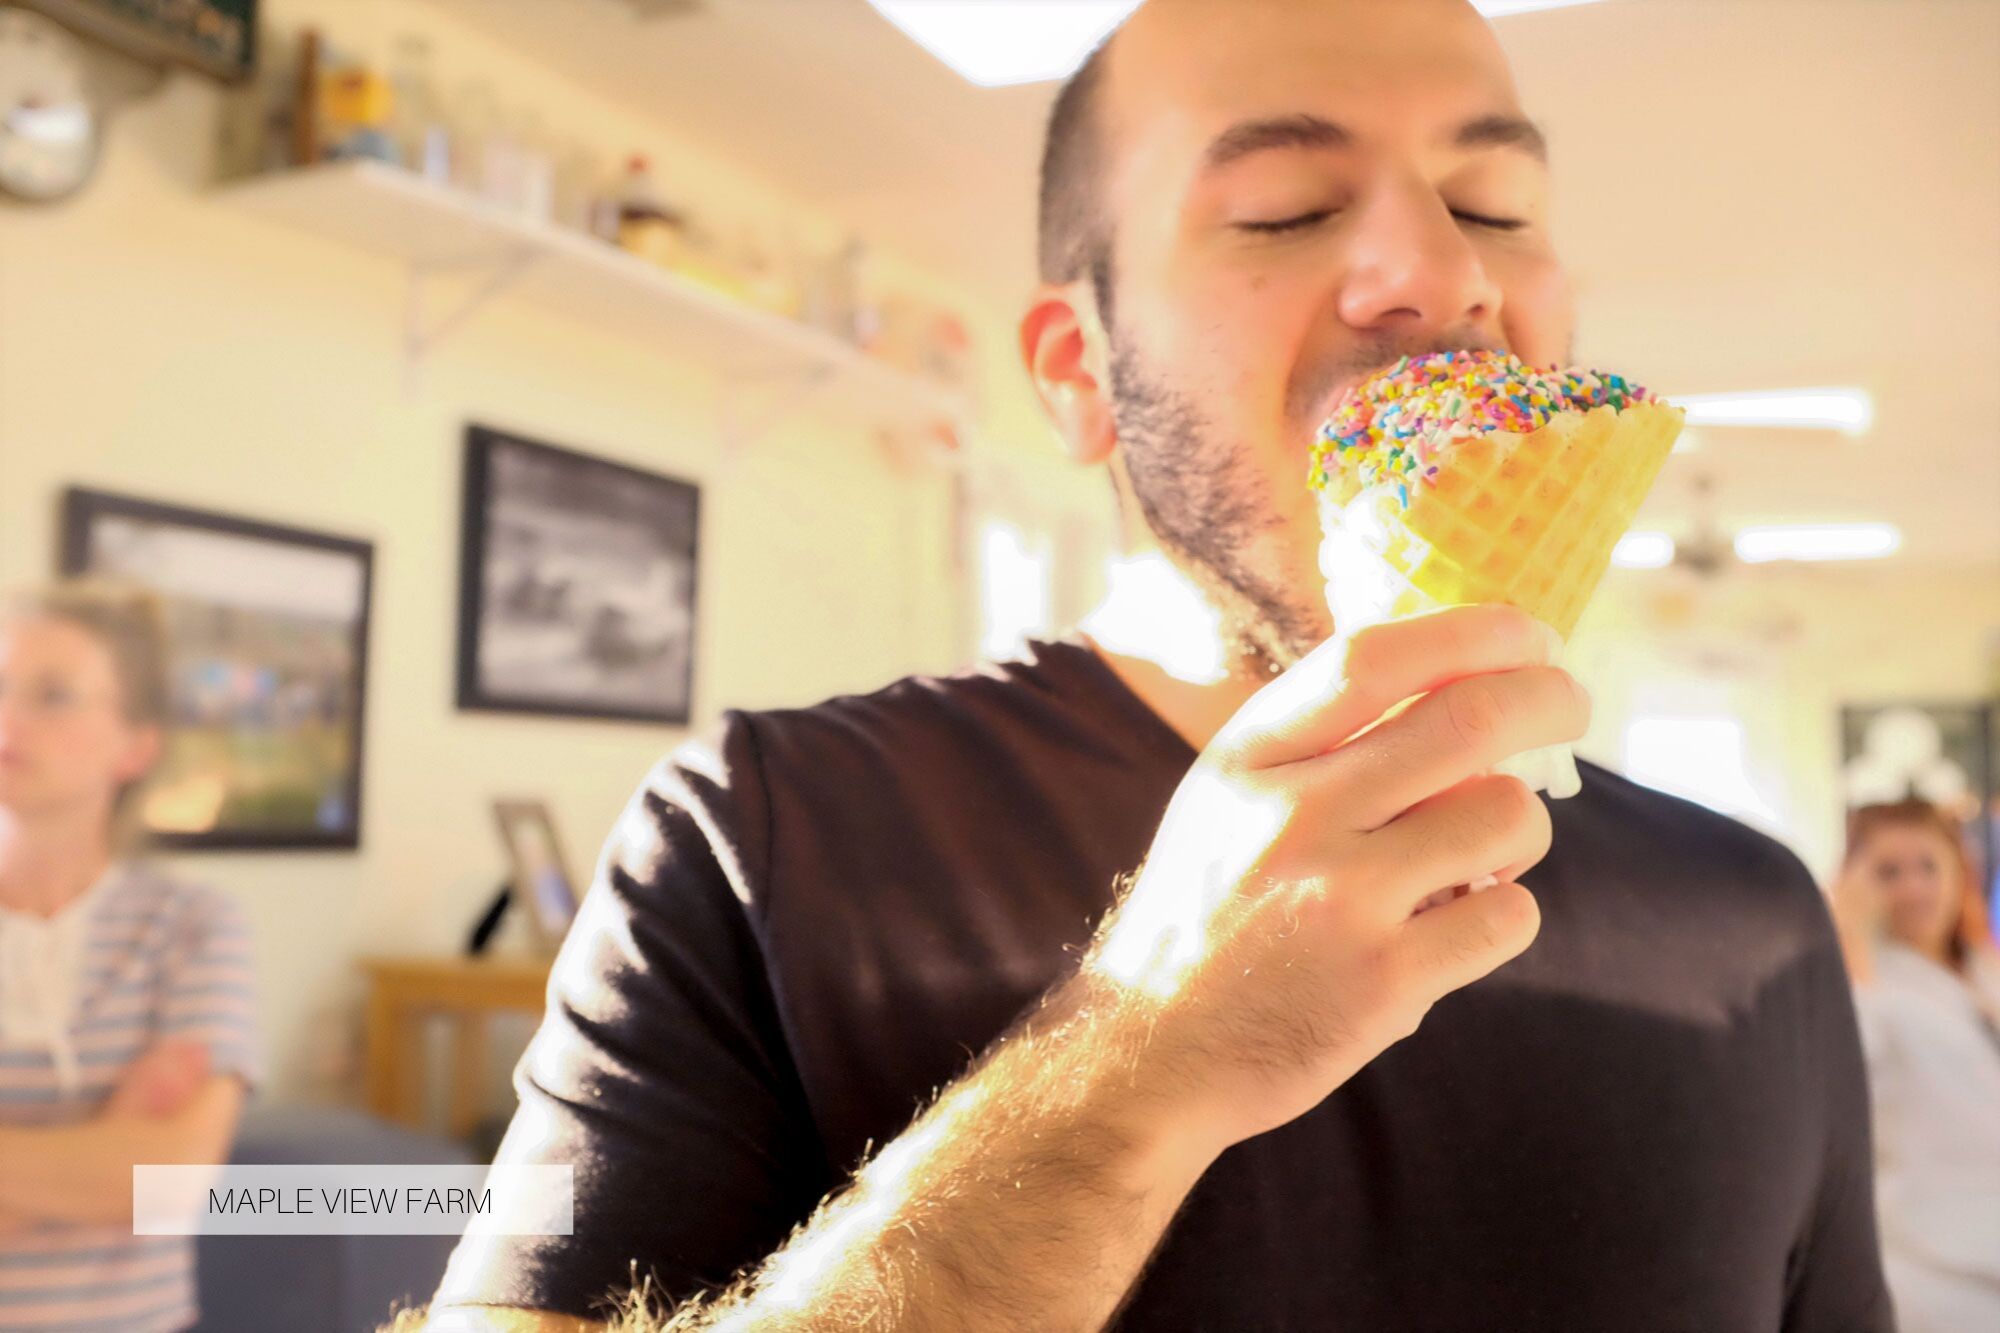 Michael eating an ice cream cone with sprinkles